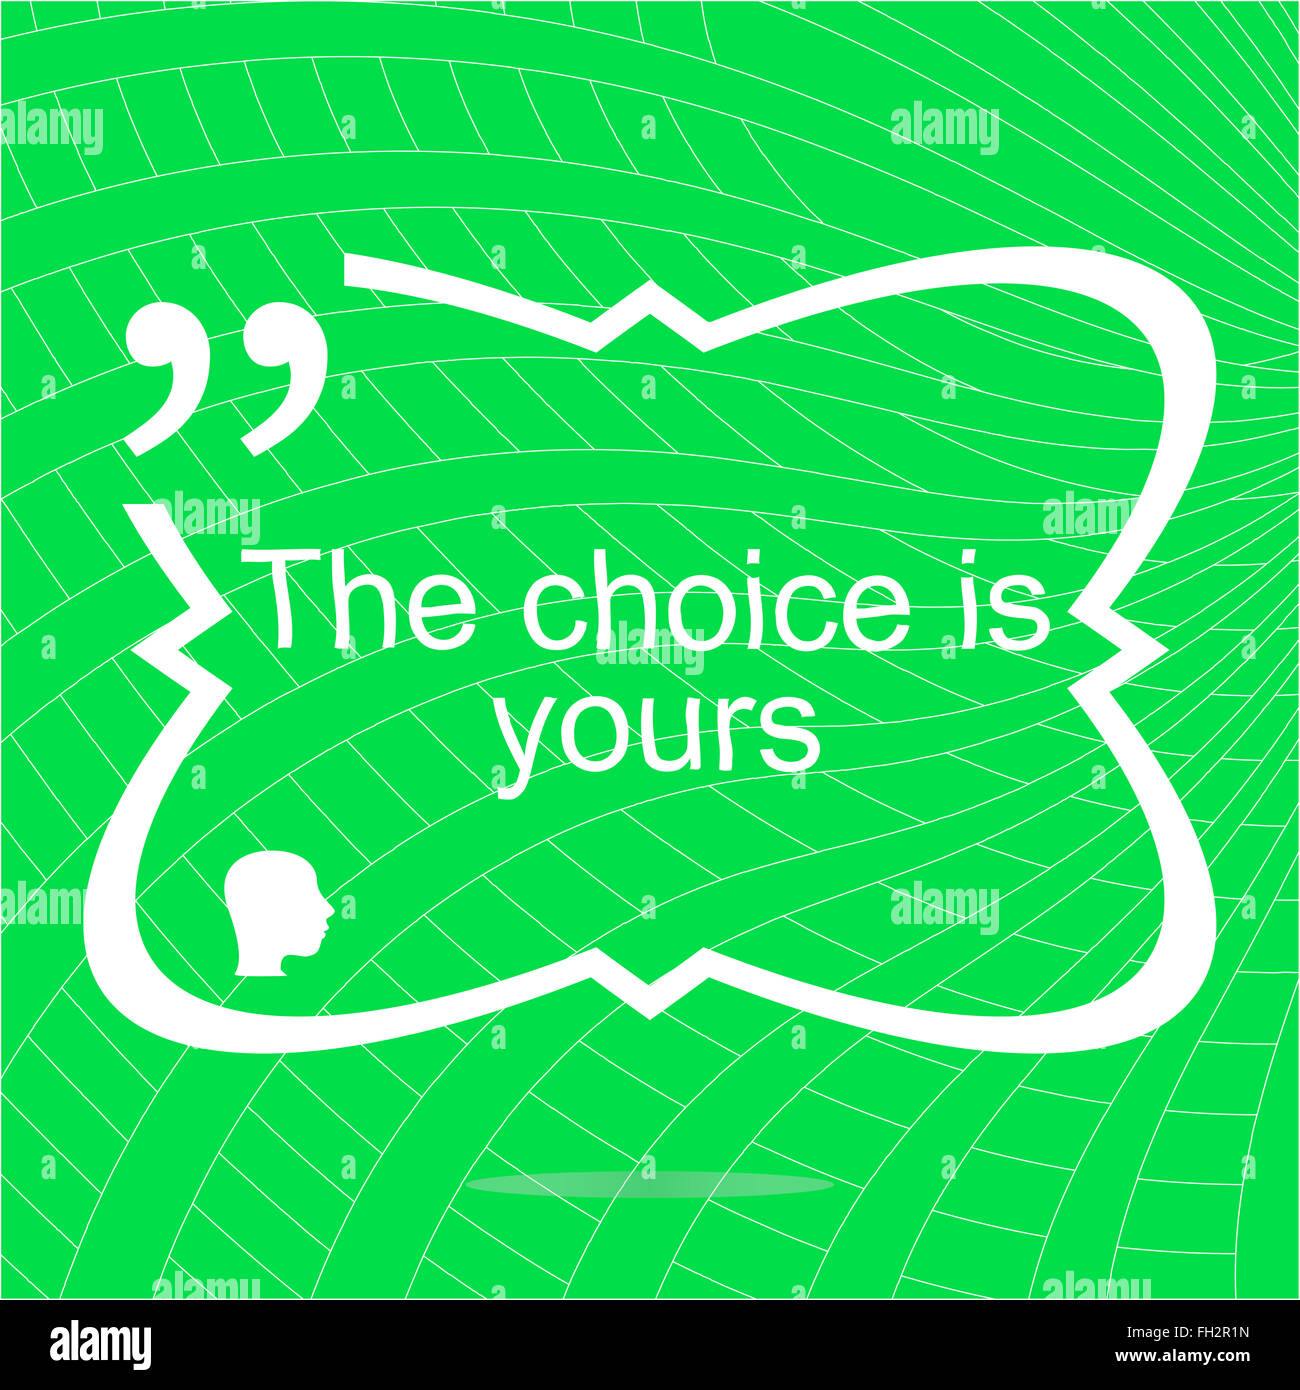 The choice is yours. Inspirational motivational quote. Simple trendy design. Positive quote Stock Photo